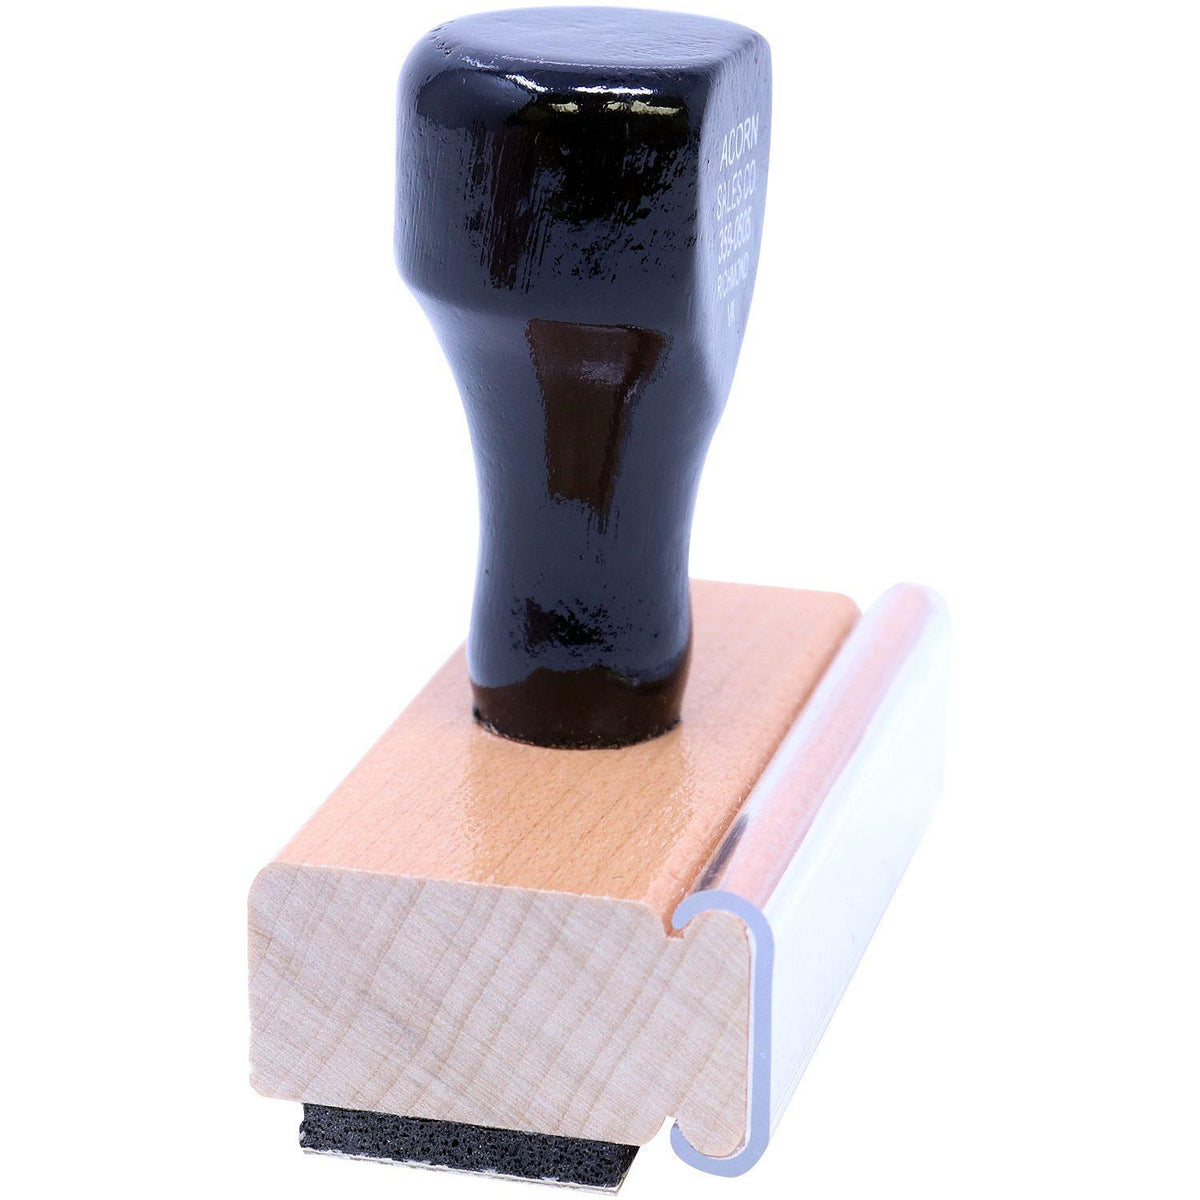 Side View of Large Banco Rubber Stamp at an Angle